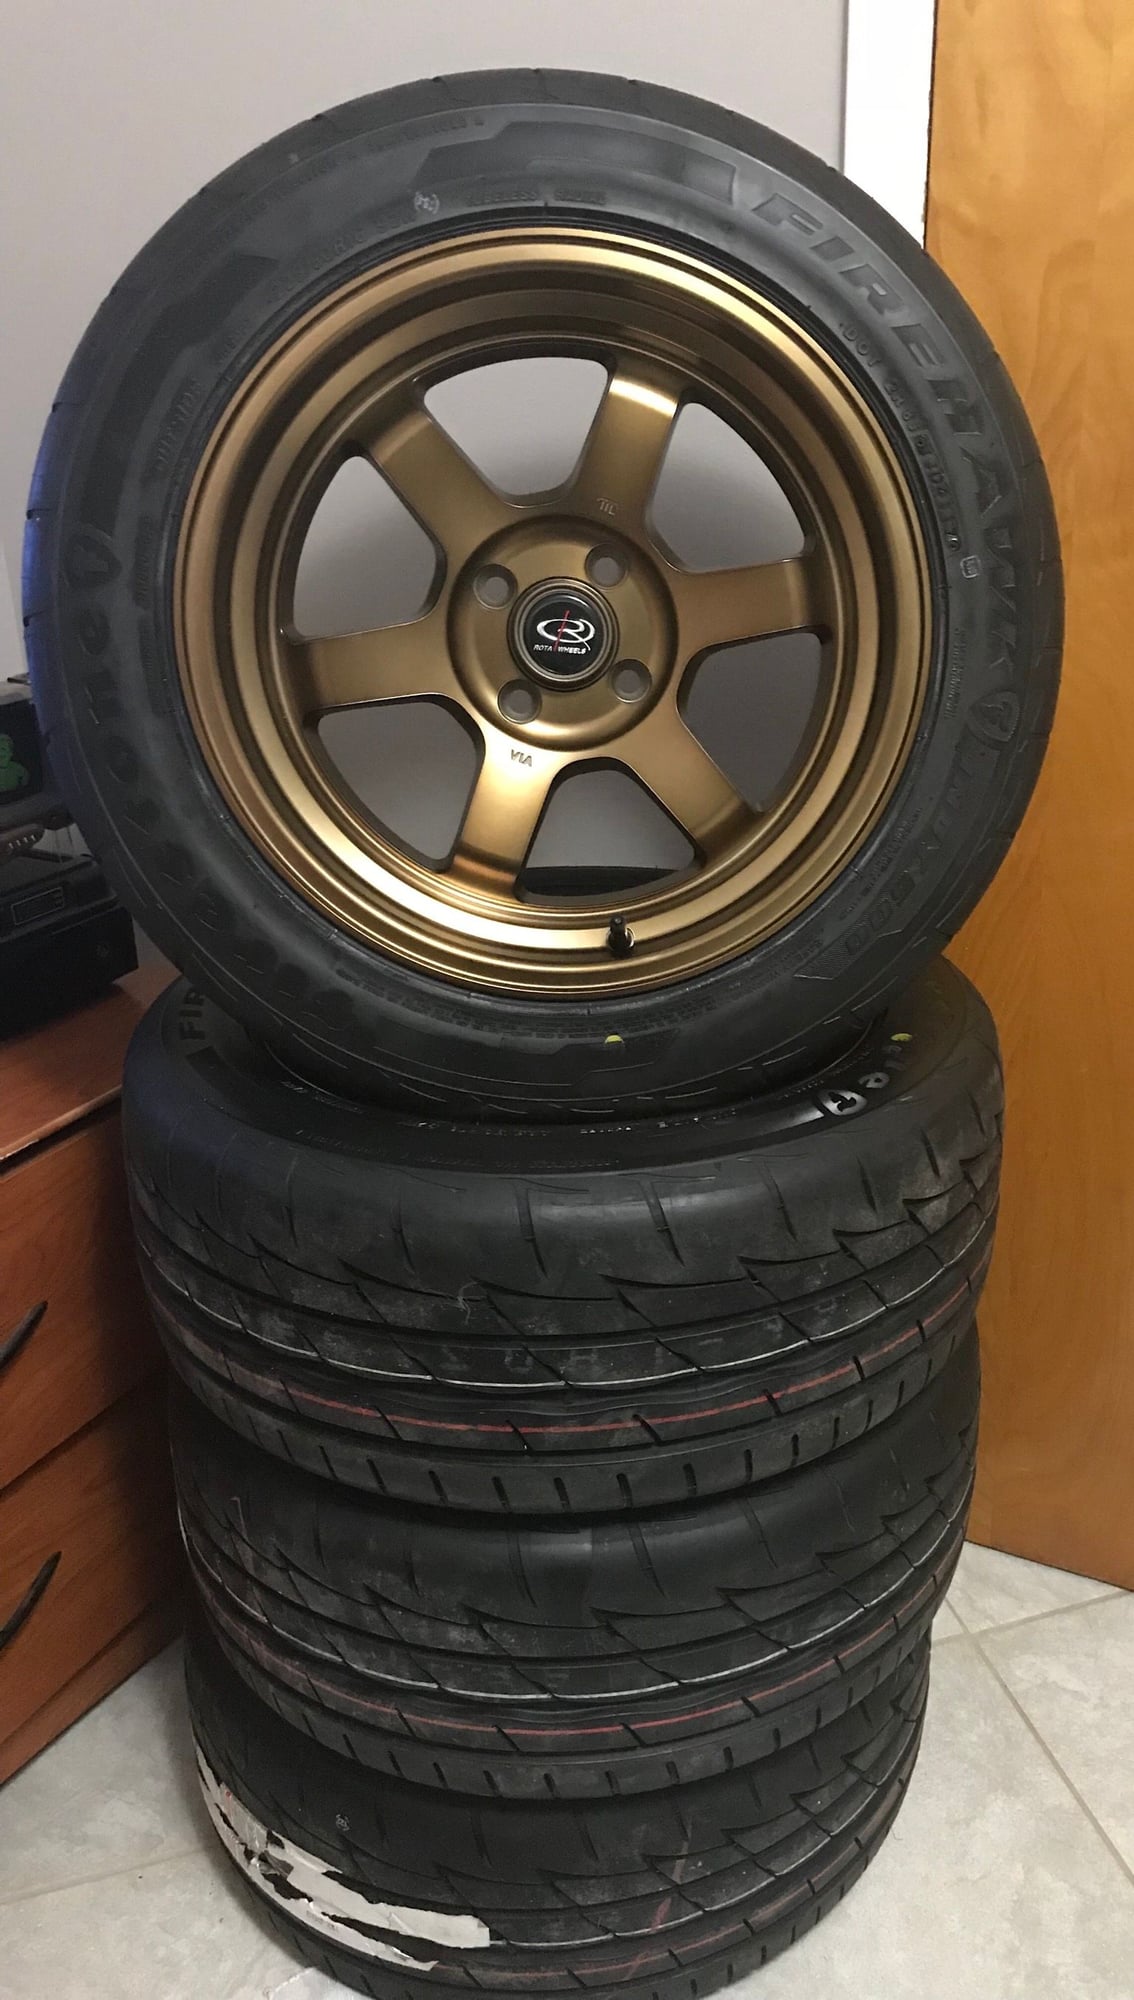 Going with 16x7 wheels. 205/50 vs 205/45 vs 225/45